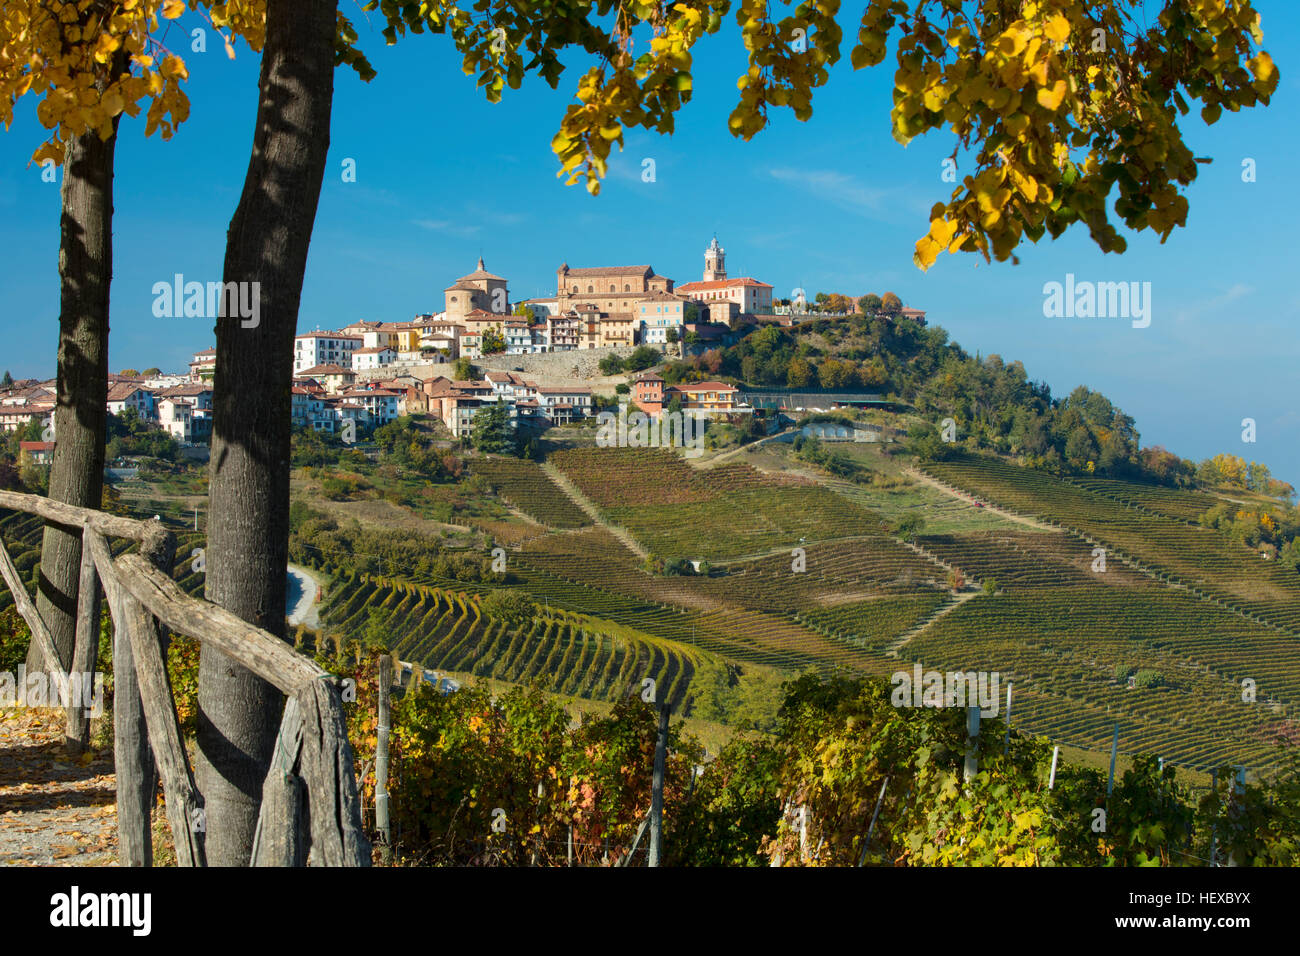 View over Nebbiolo vineyards to medieval town of La Morra, Piemonte, Italy Stock Photo